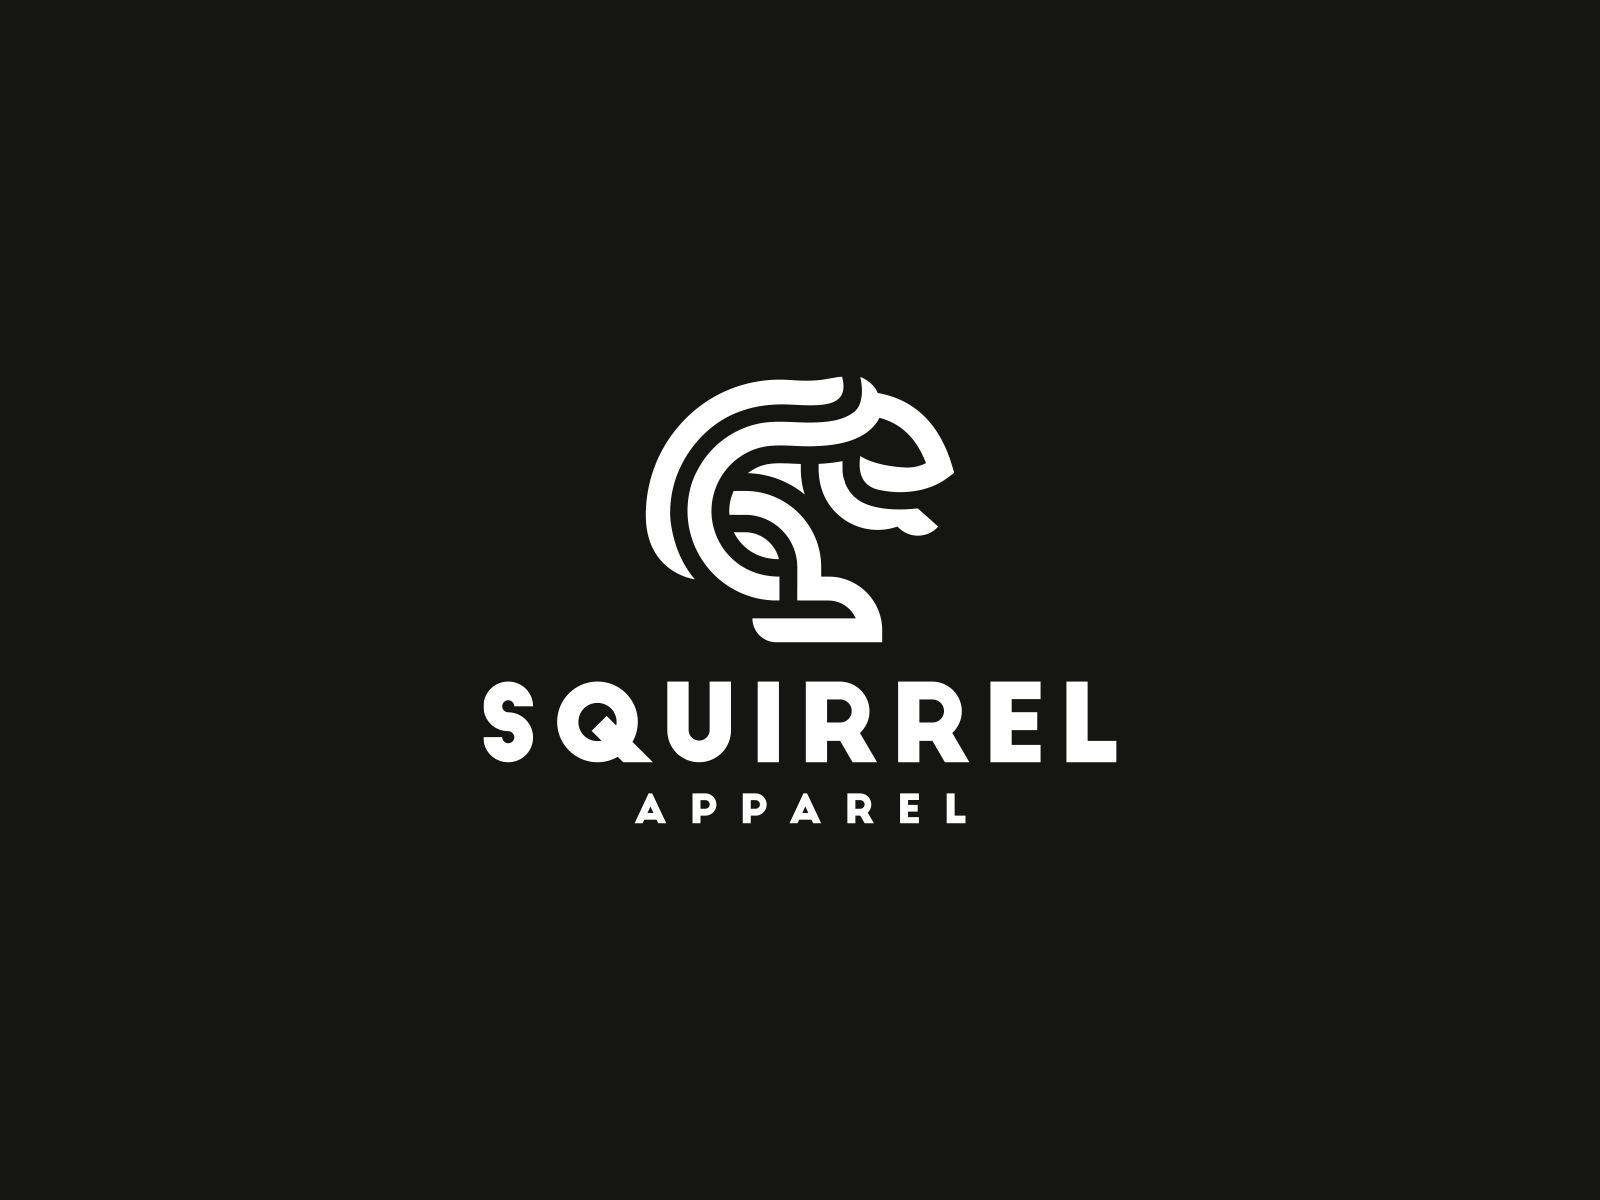 Squirrel Apparel by Logorys on Dribbble